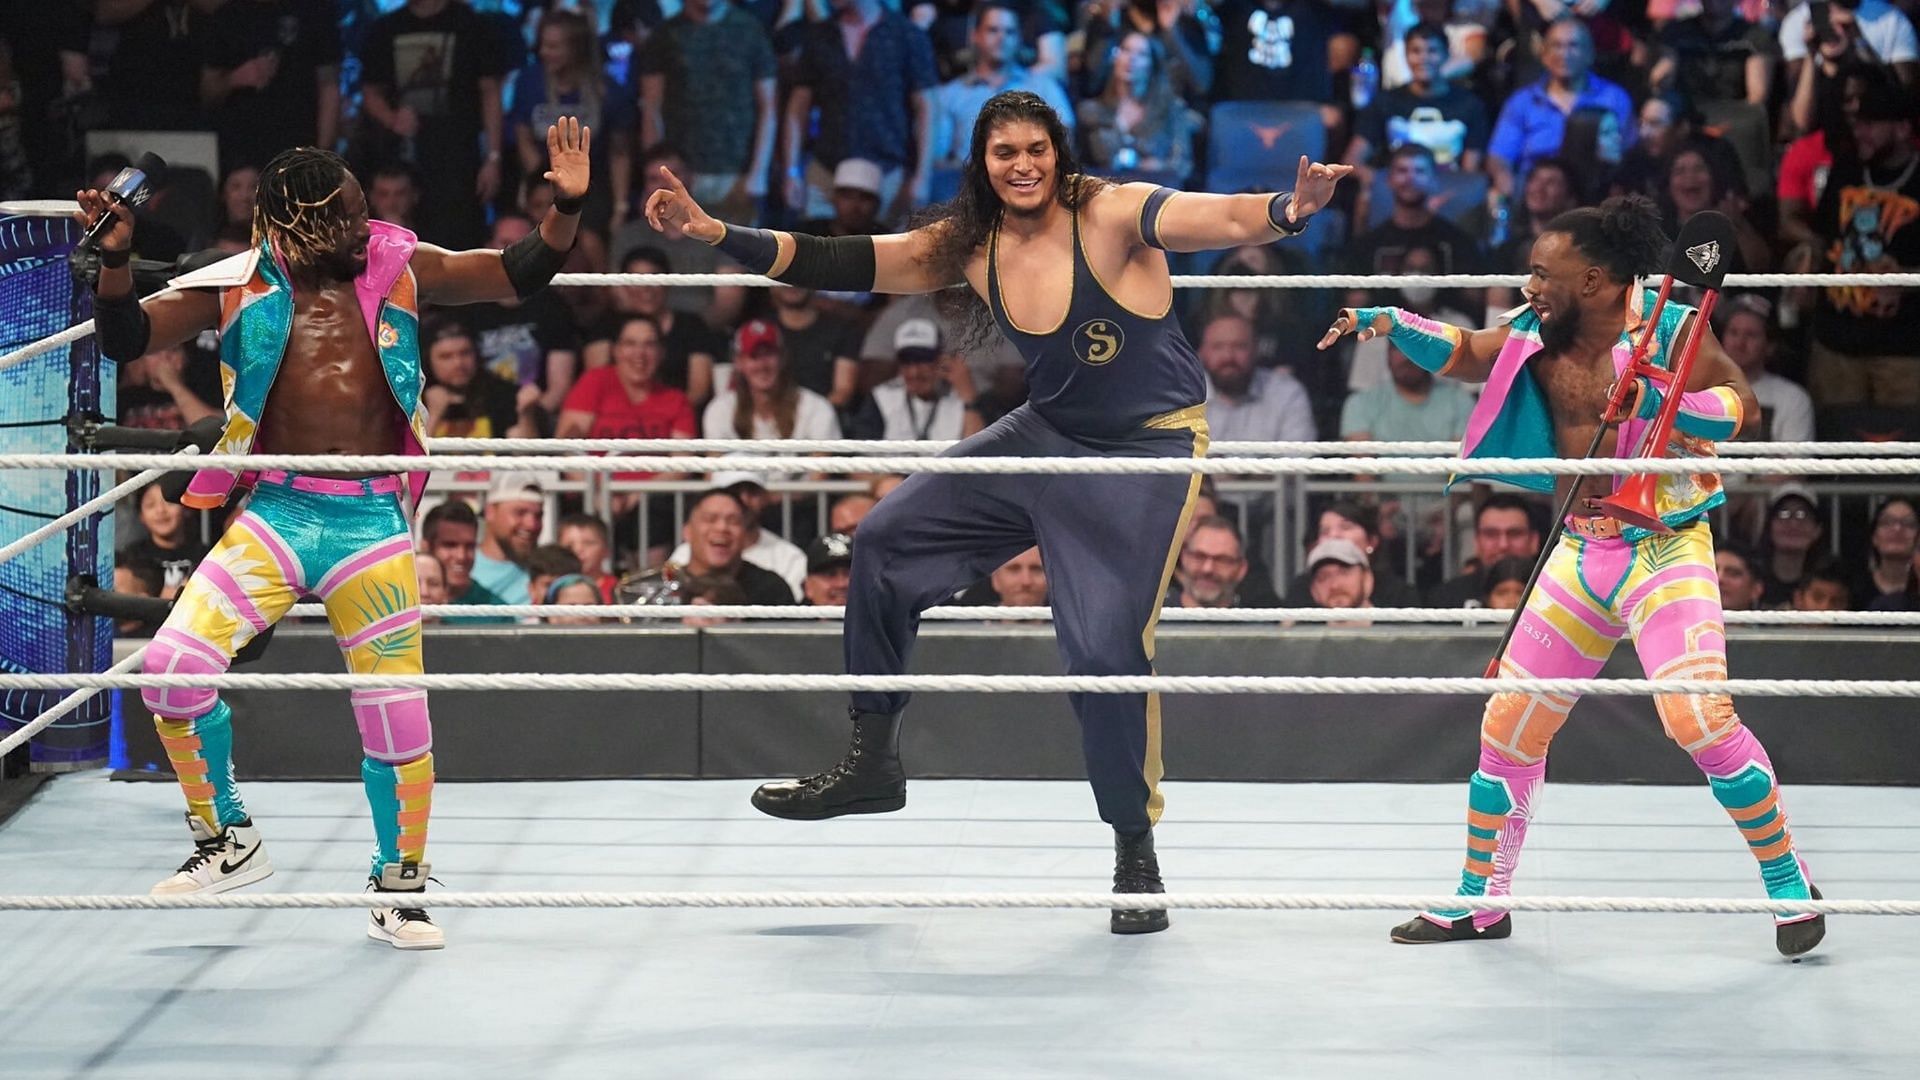 Shanky dances with the New Day on WWE SmackDown.